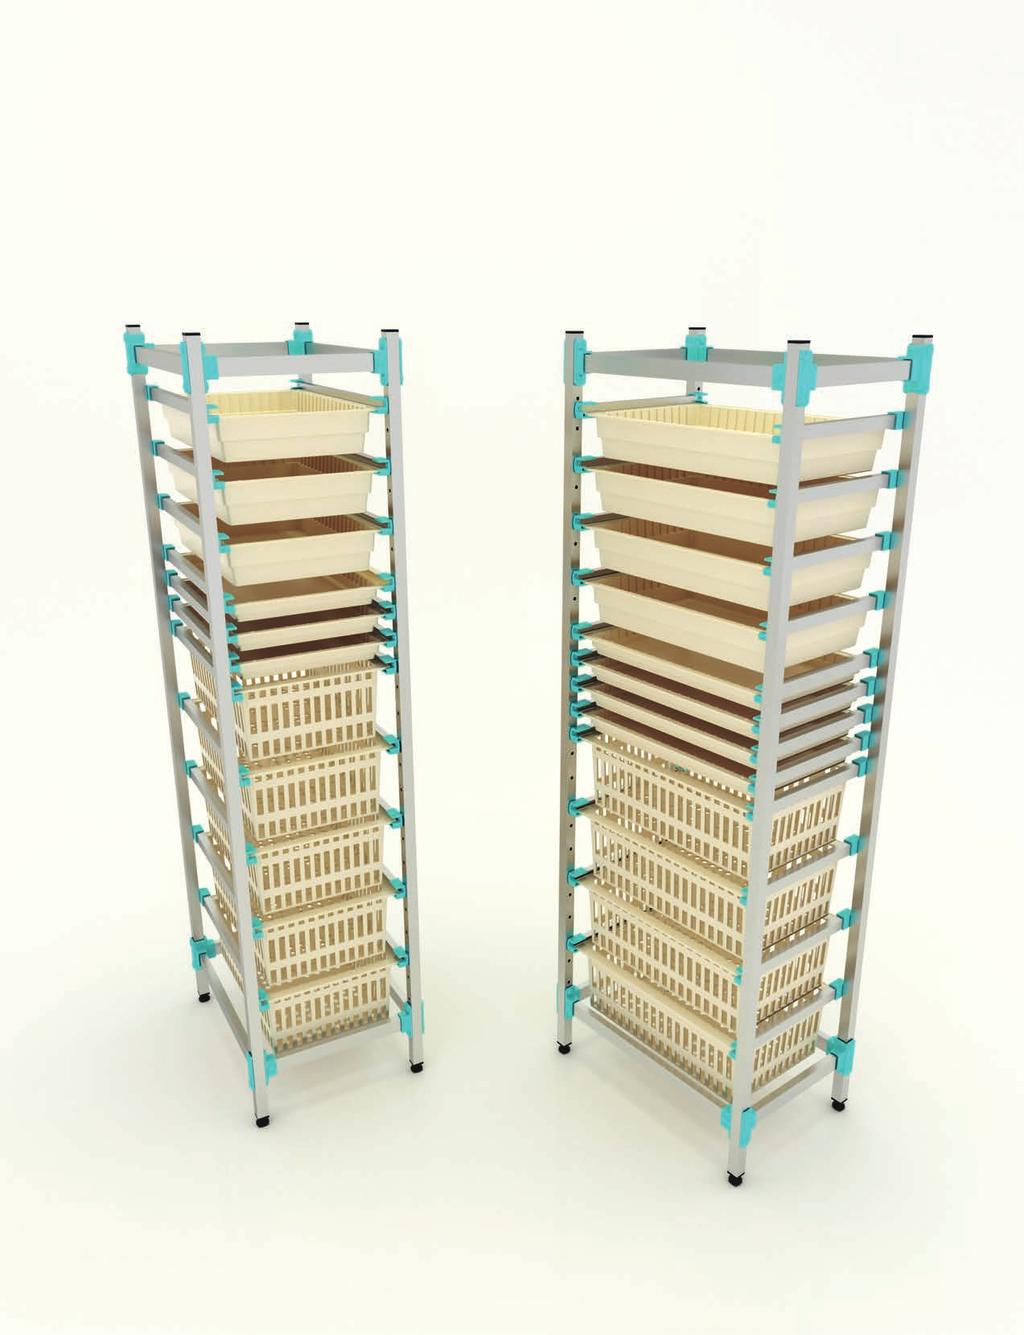 www.inspital.com HIGH EFFICIENCY IN SUPPLY STORAGE Inspital shelving systems can be configured to fulfill user need.